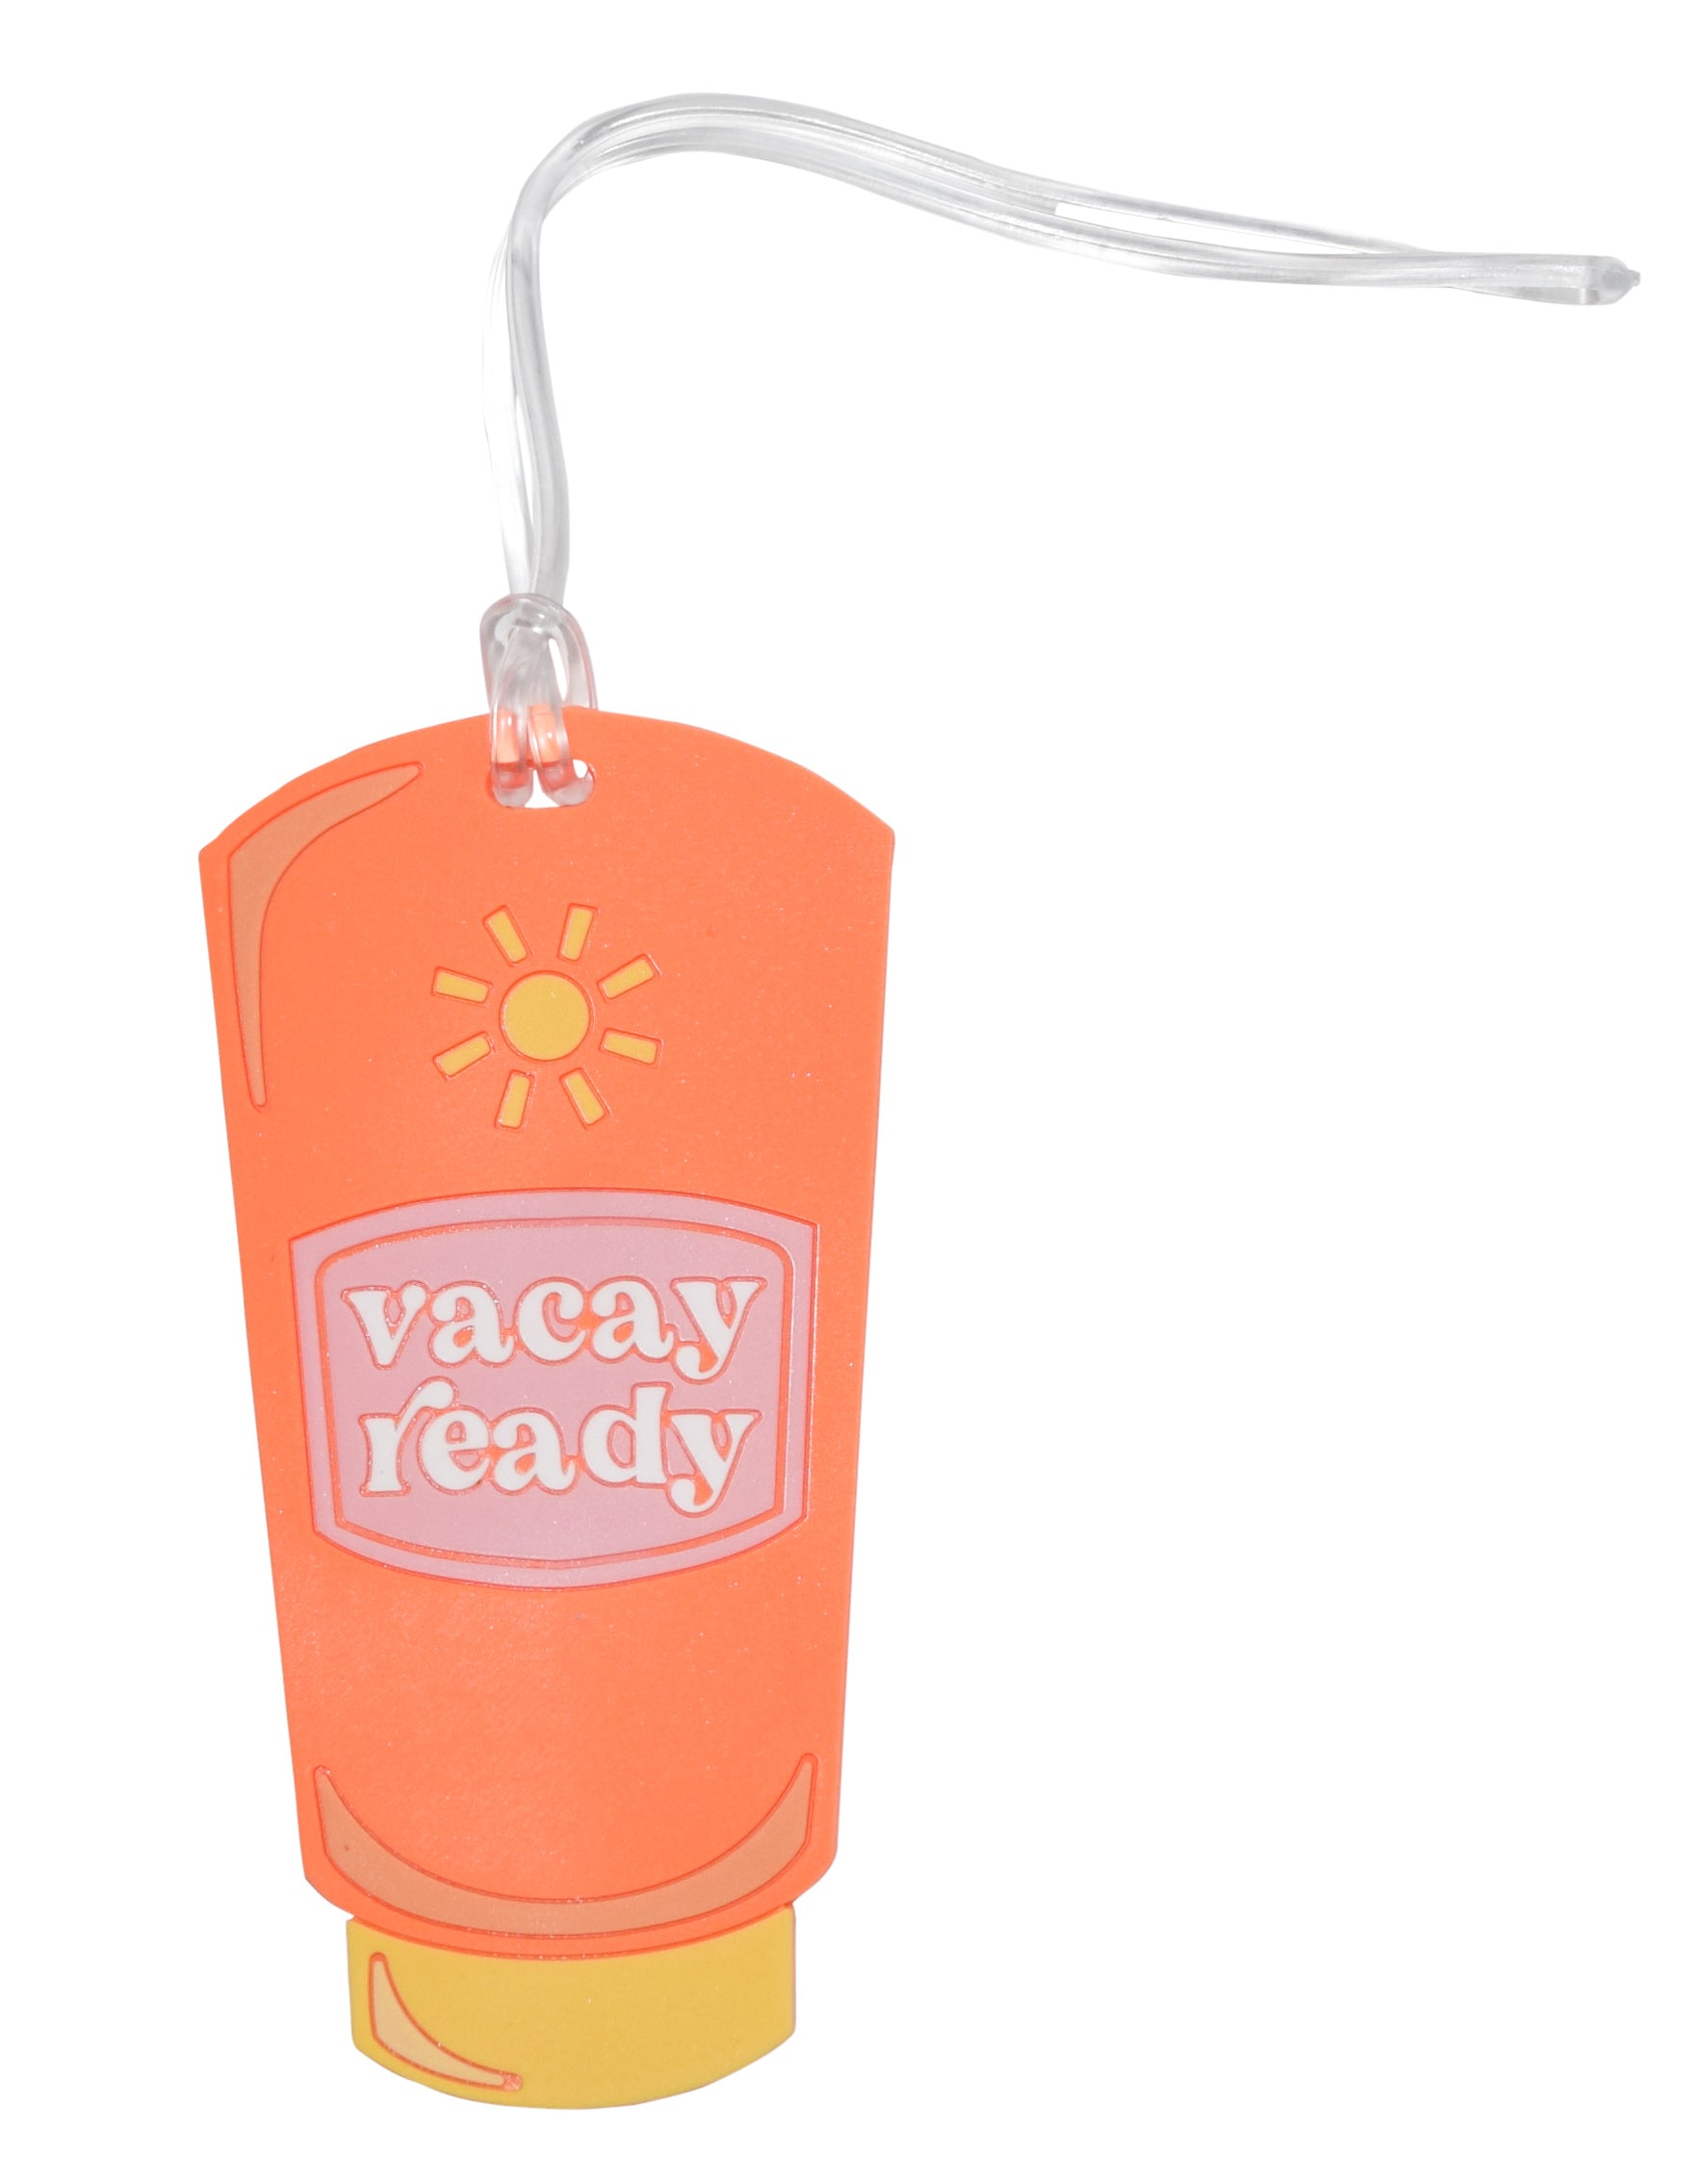 Vacay Ready Travel Journal & Silicone Luggage Tag Set